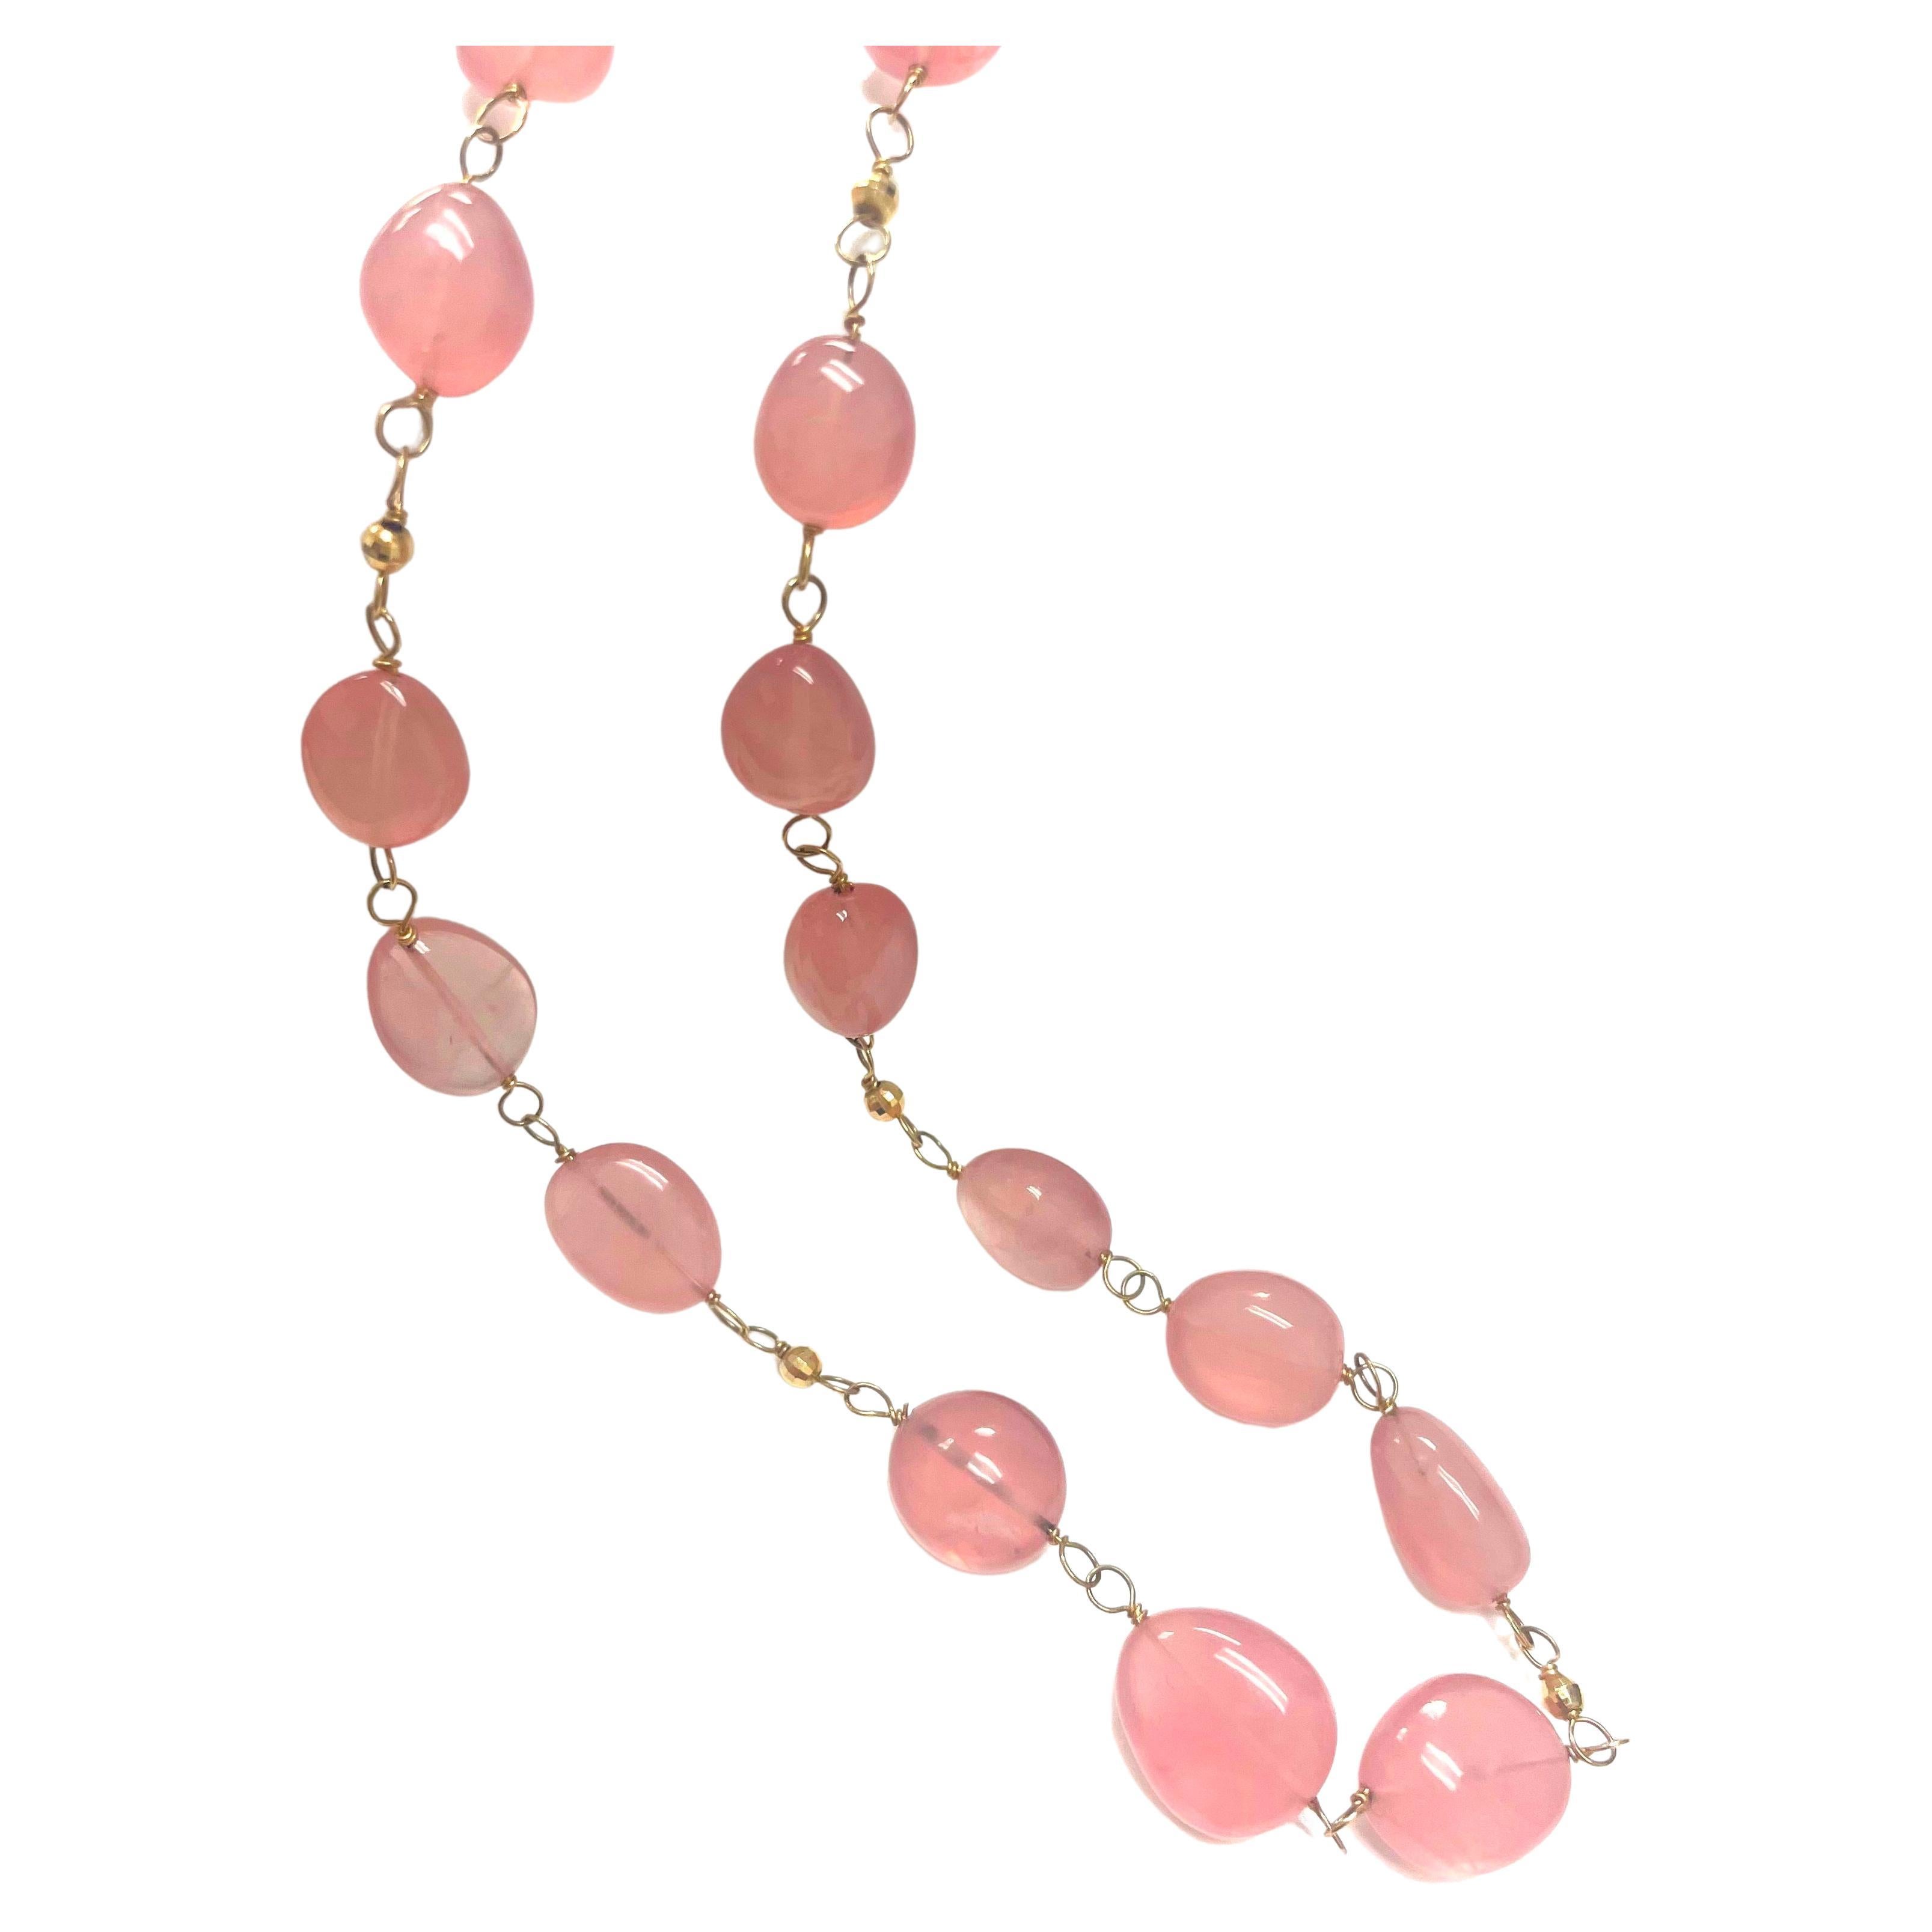 Description
Feminine, beautifully shaped smooth nuggets in a gorgeous uniform color of semi-opaque rose quartz and accented with faceted 3mm 14k yellow gold balls. The necklace is handmade with 14k yellow gold links and can be worn long or short